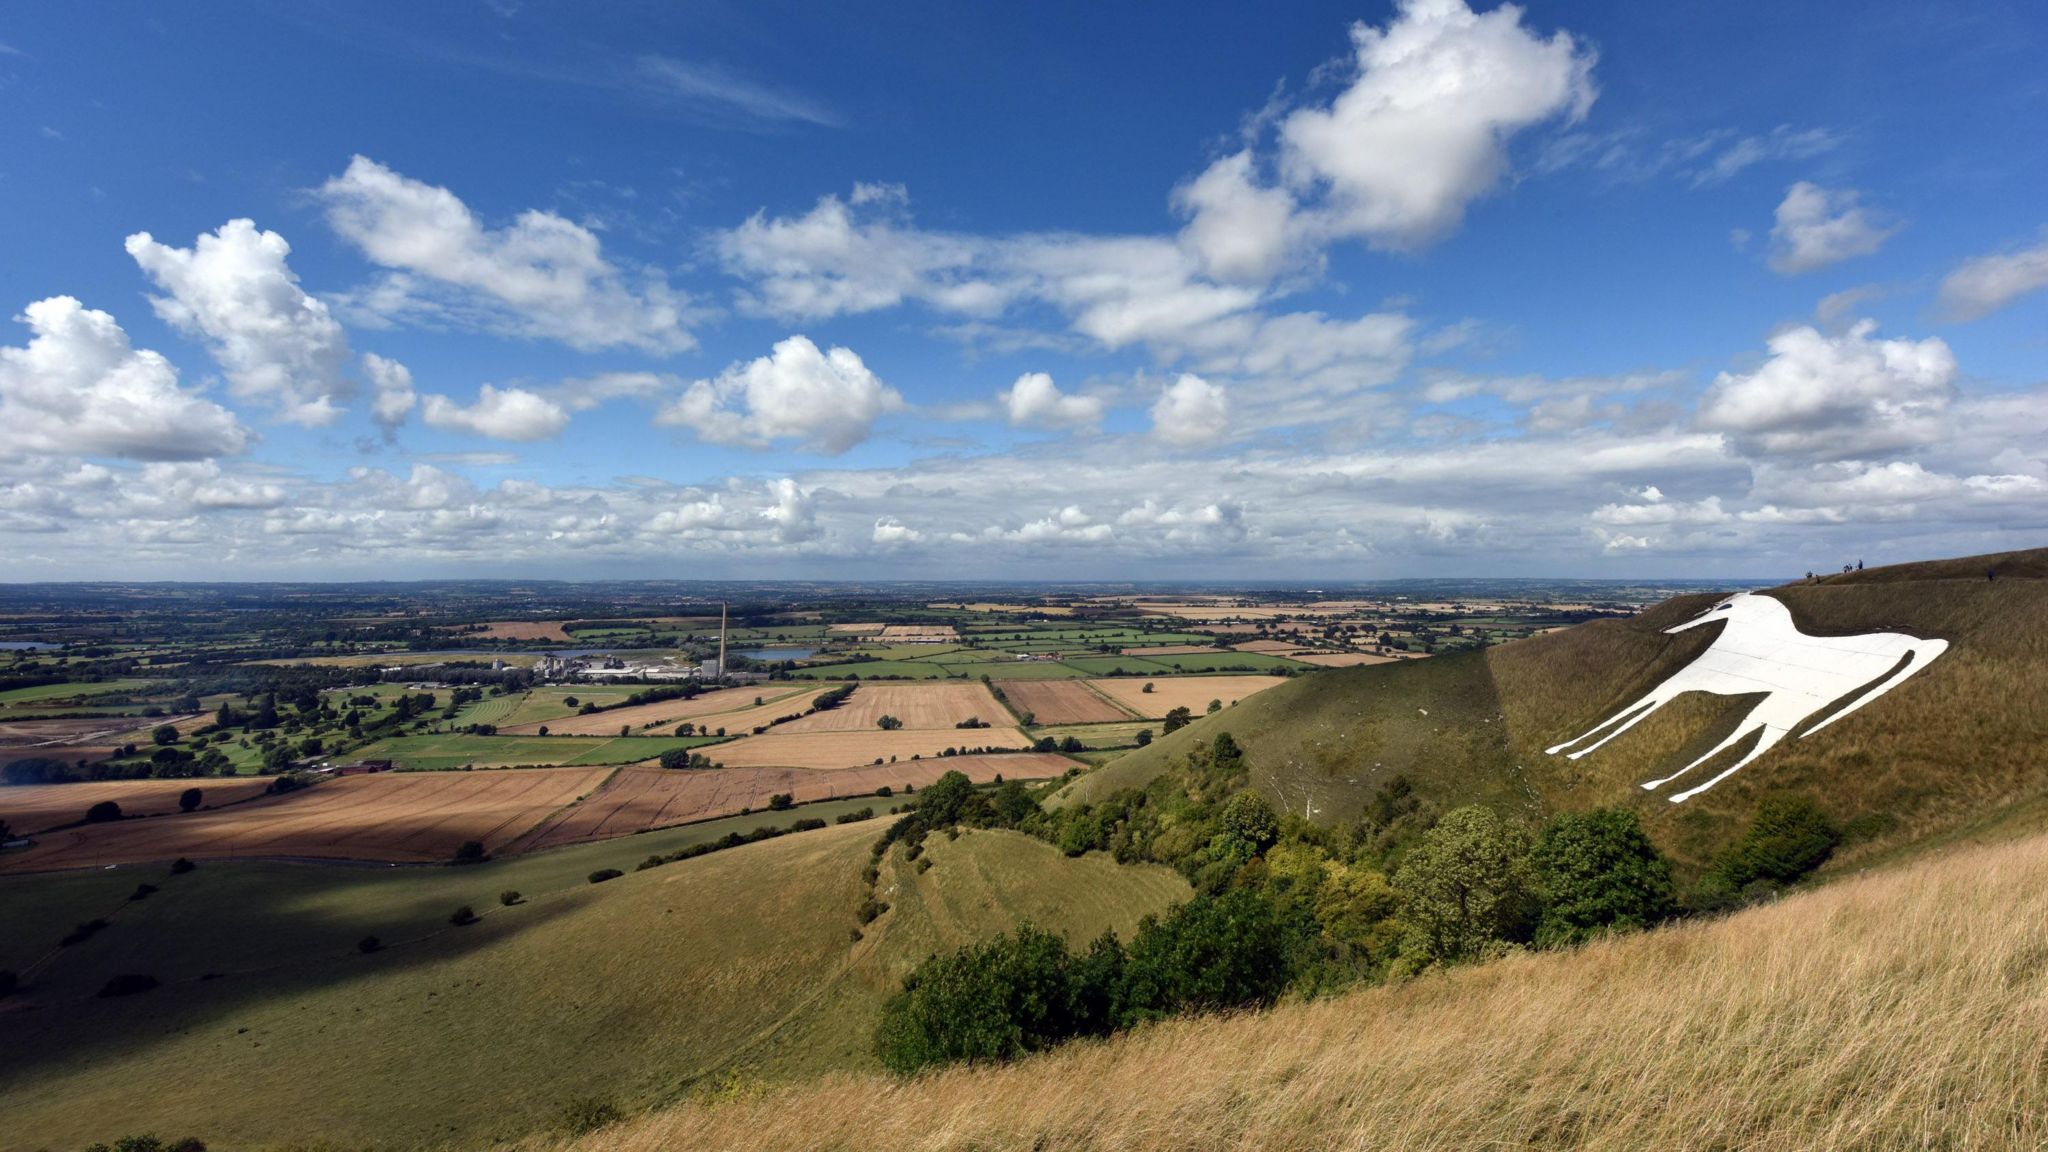 Overlooking the Wiltshire landscape from the Westbury White Horse